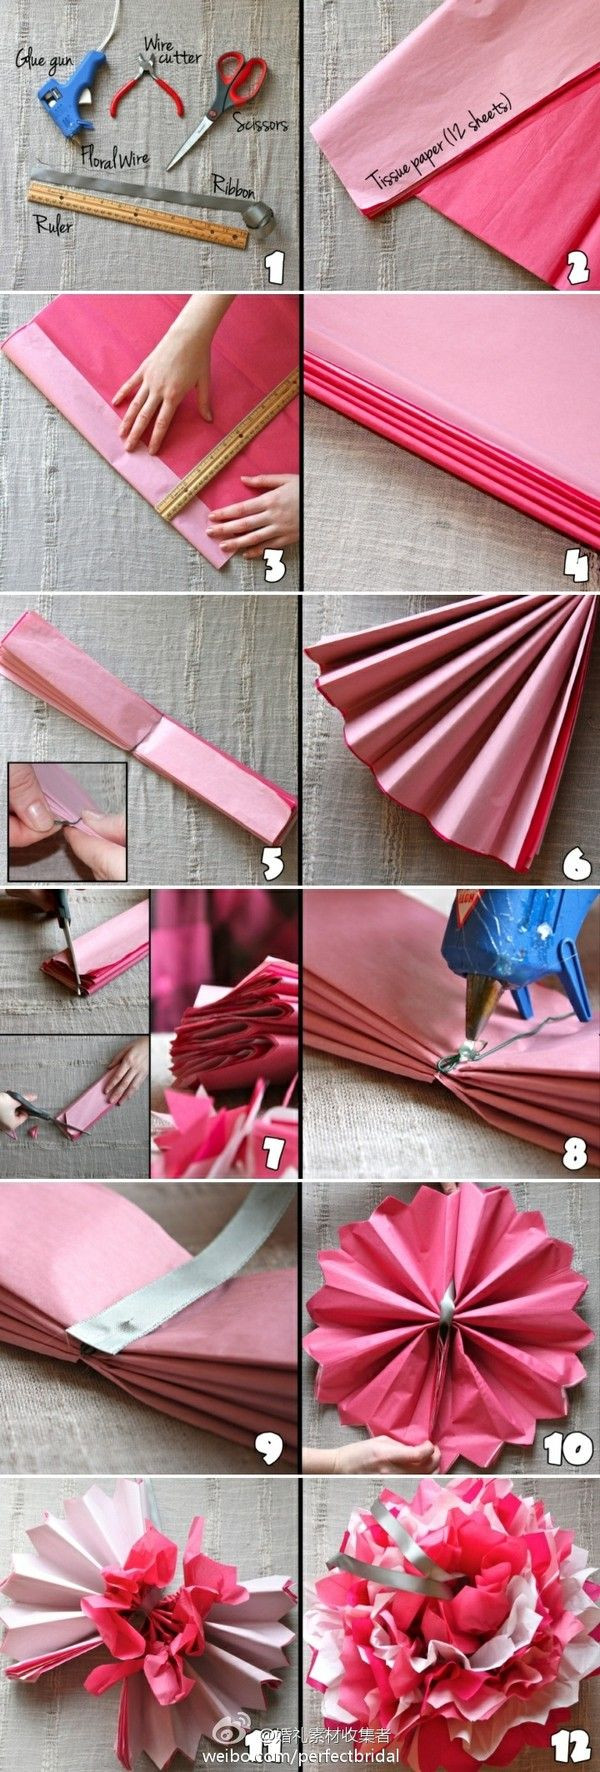 Tissue Paper Decorations DIY
 DIY Beautiful Tissue Paper Flowers for Wedding